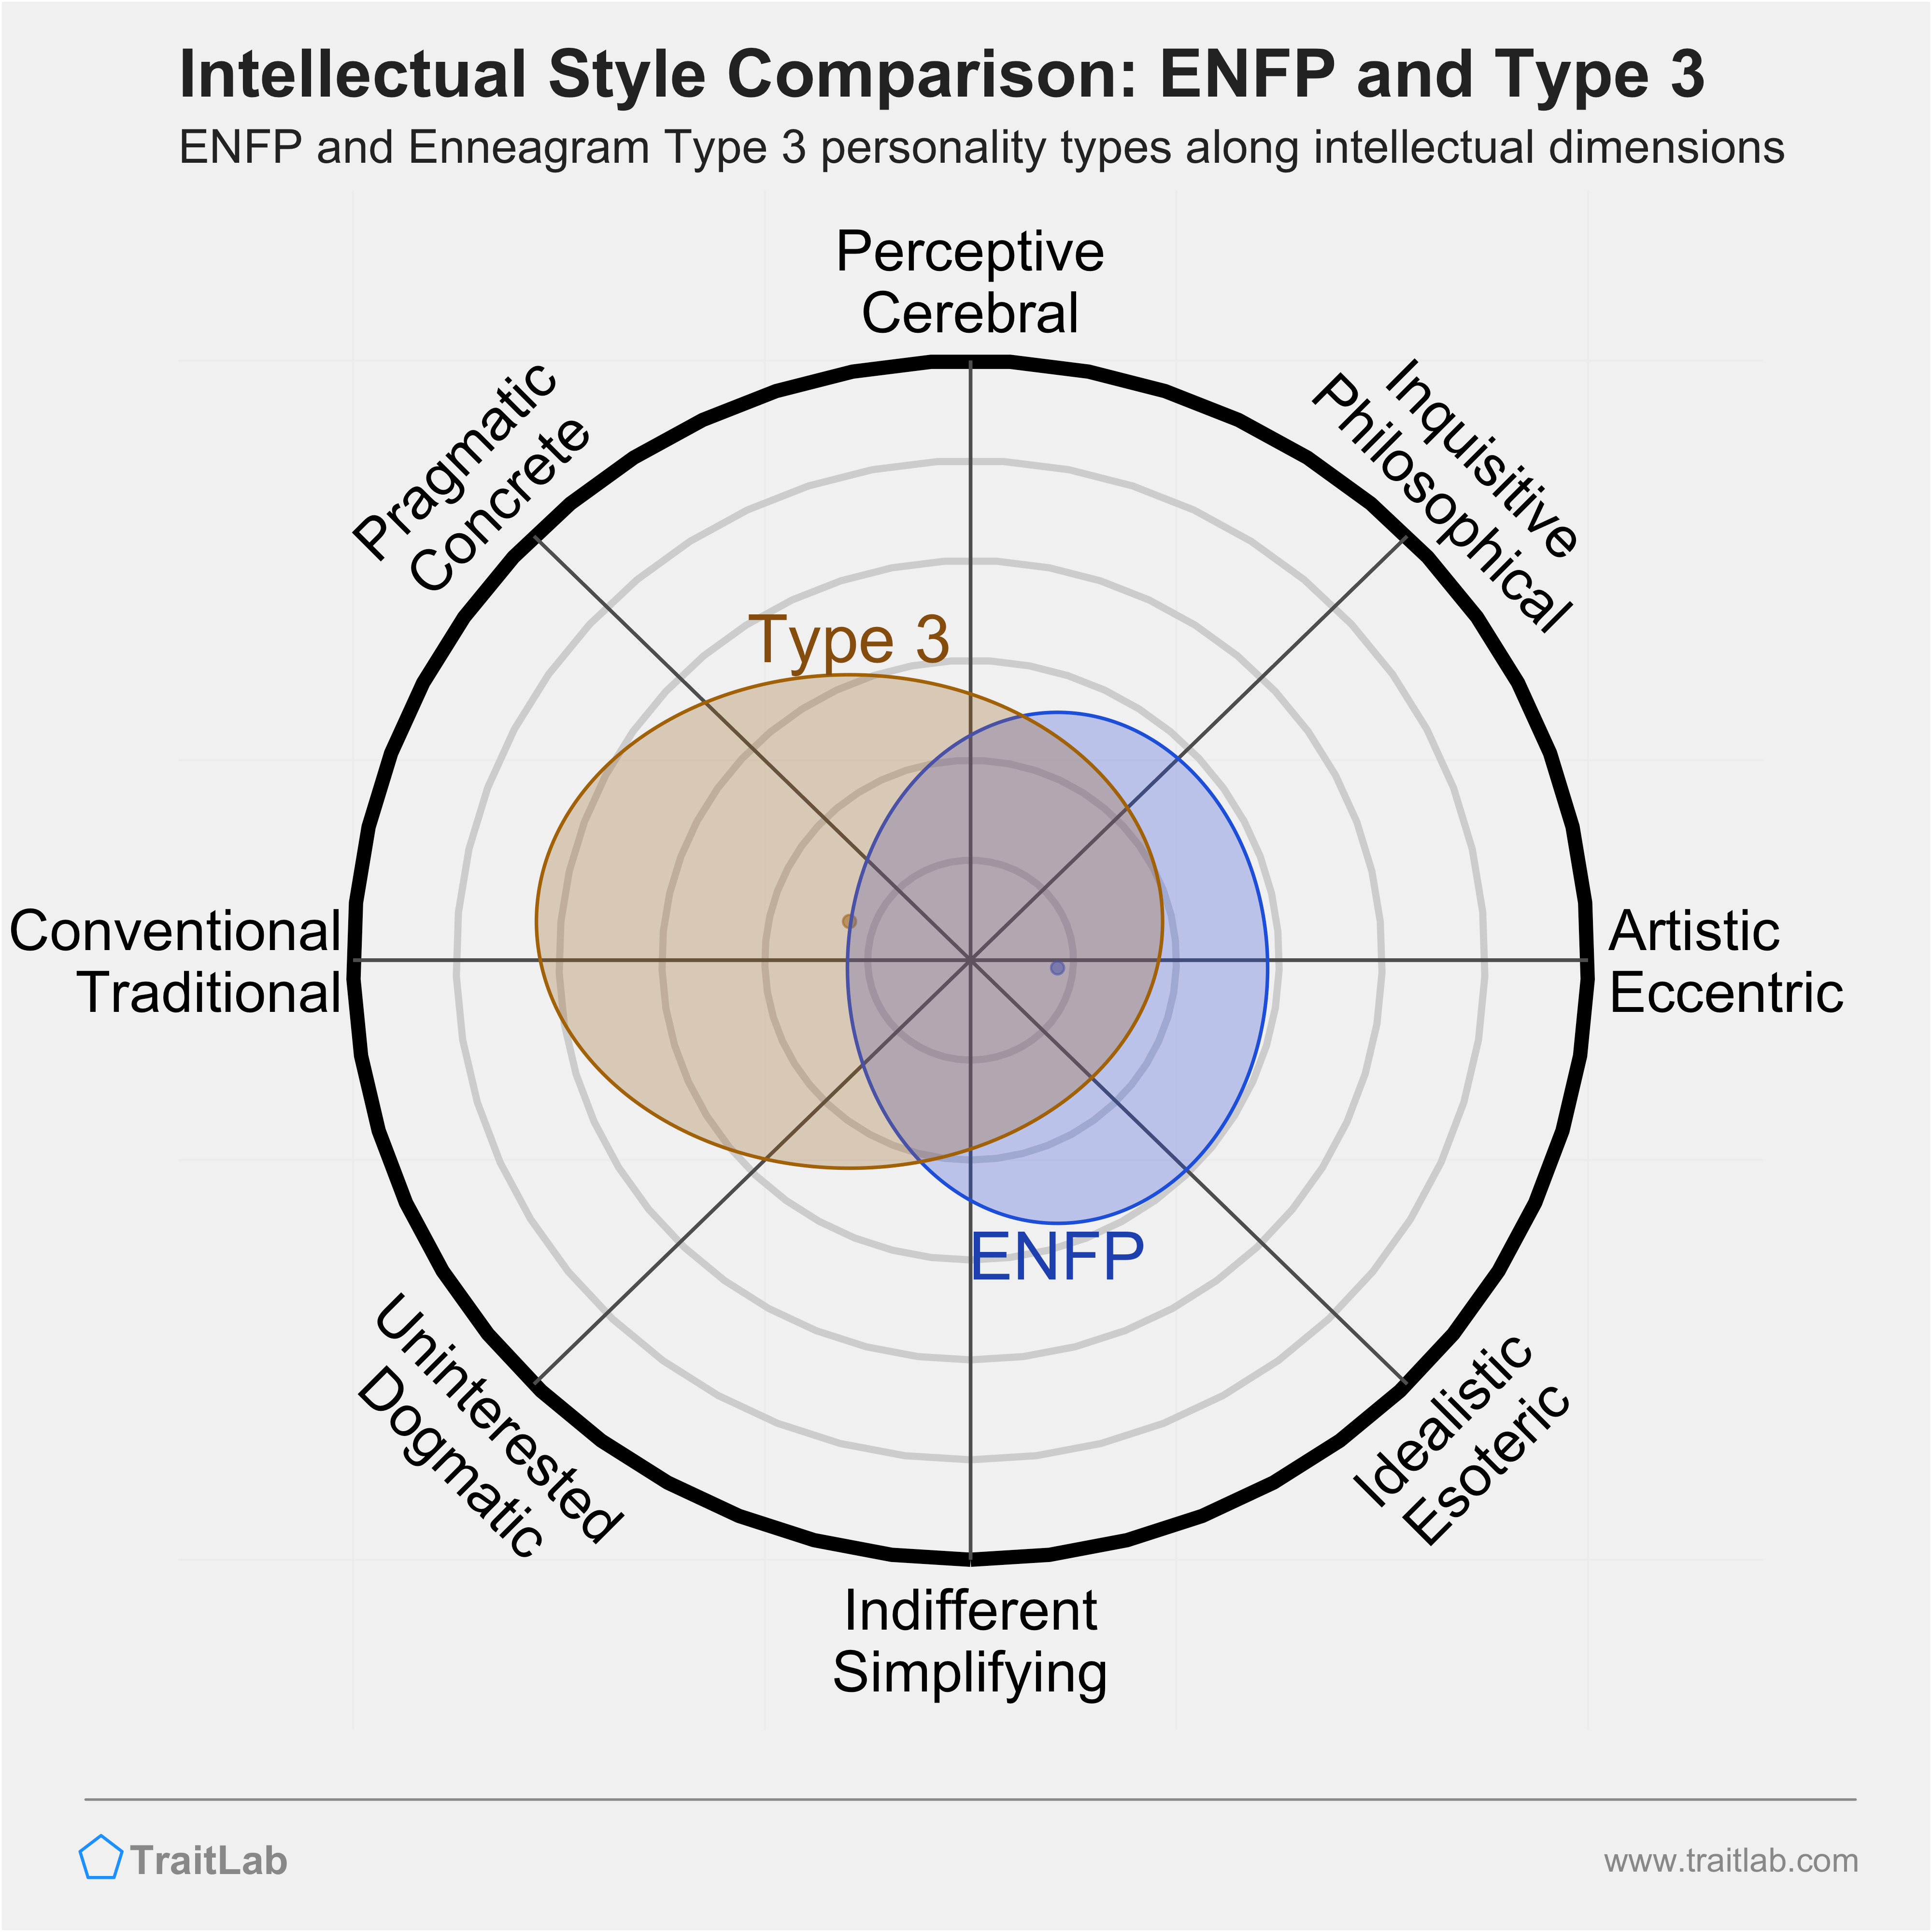 ENFP and Type 3 comparison across intellectual dimensions